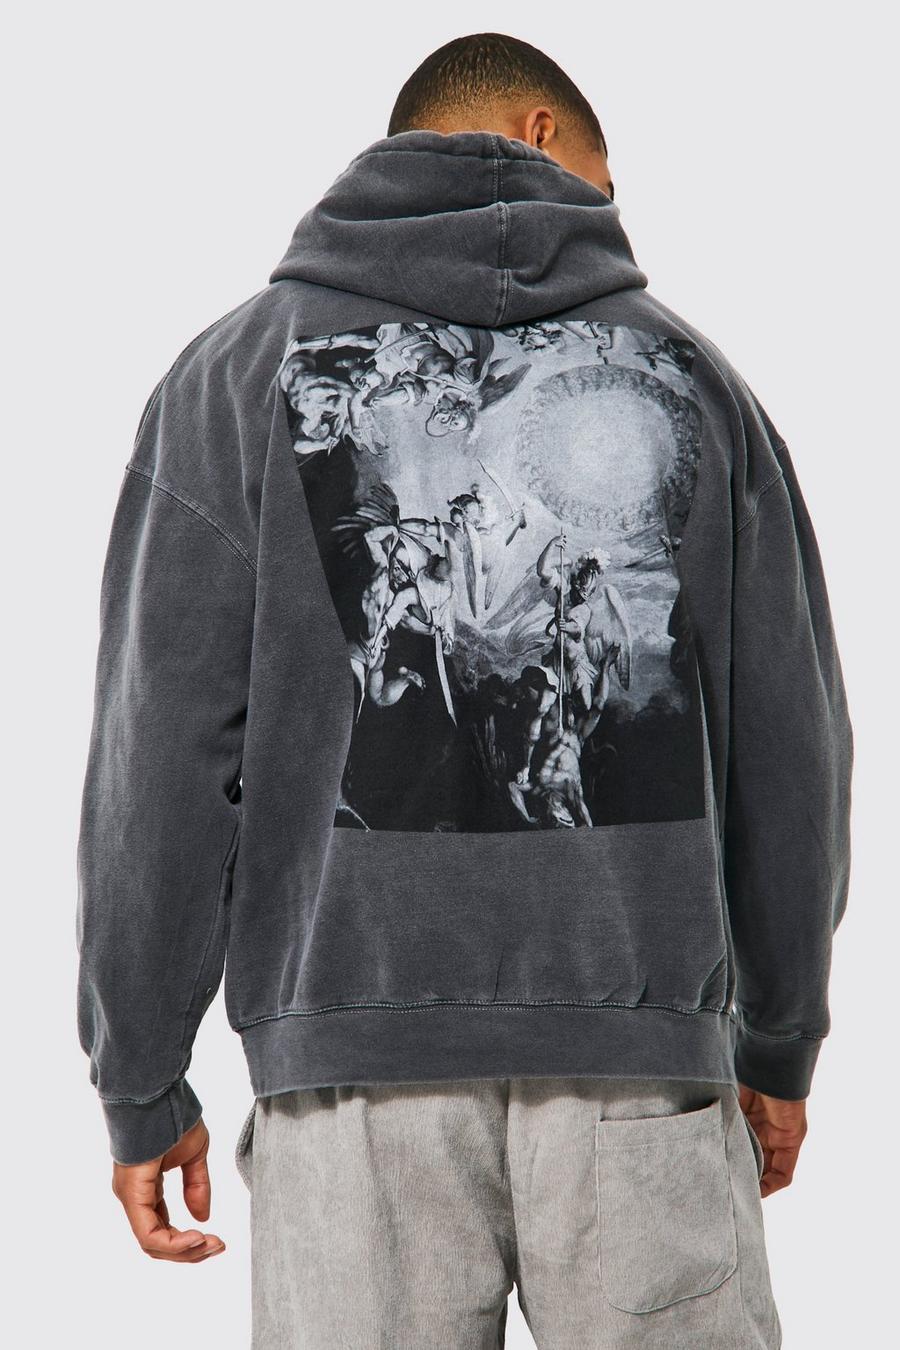 Charcoal grå Oversized hoodie med tryck